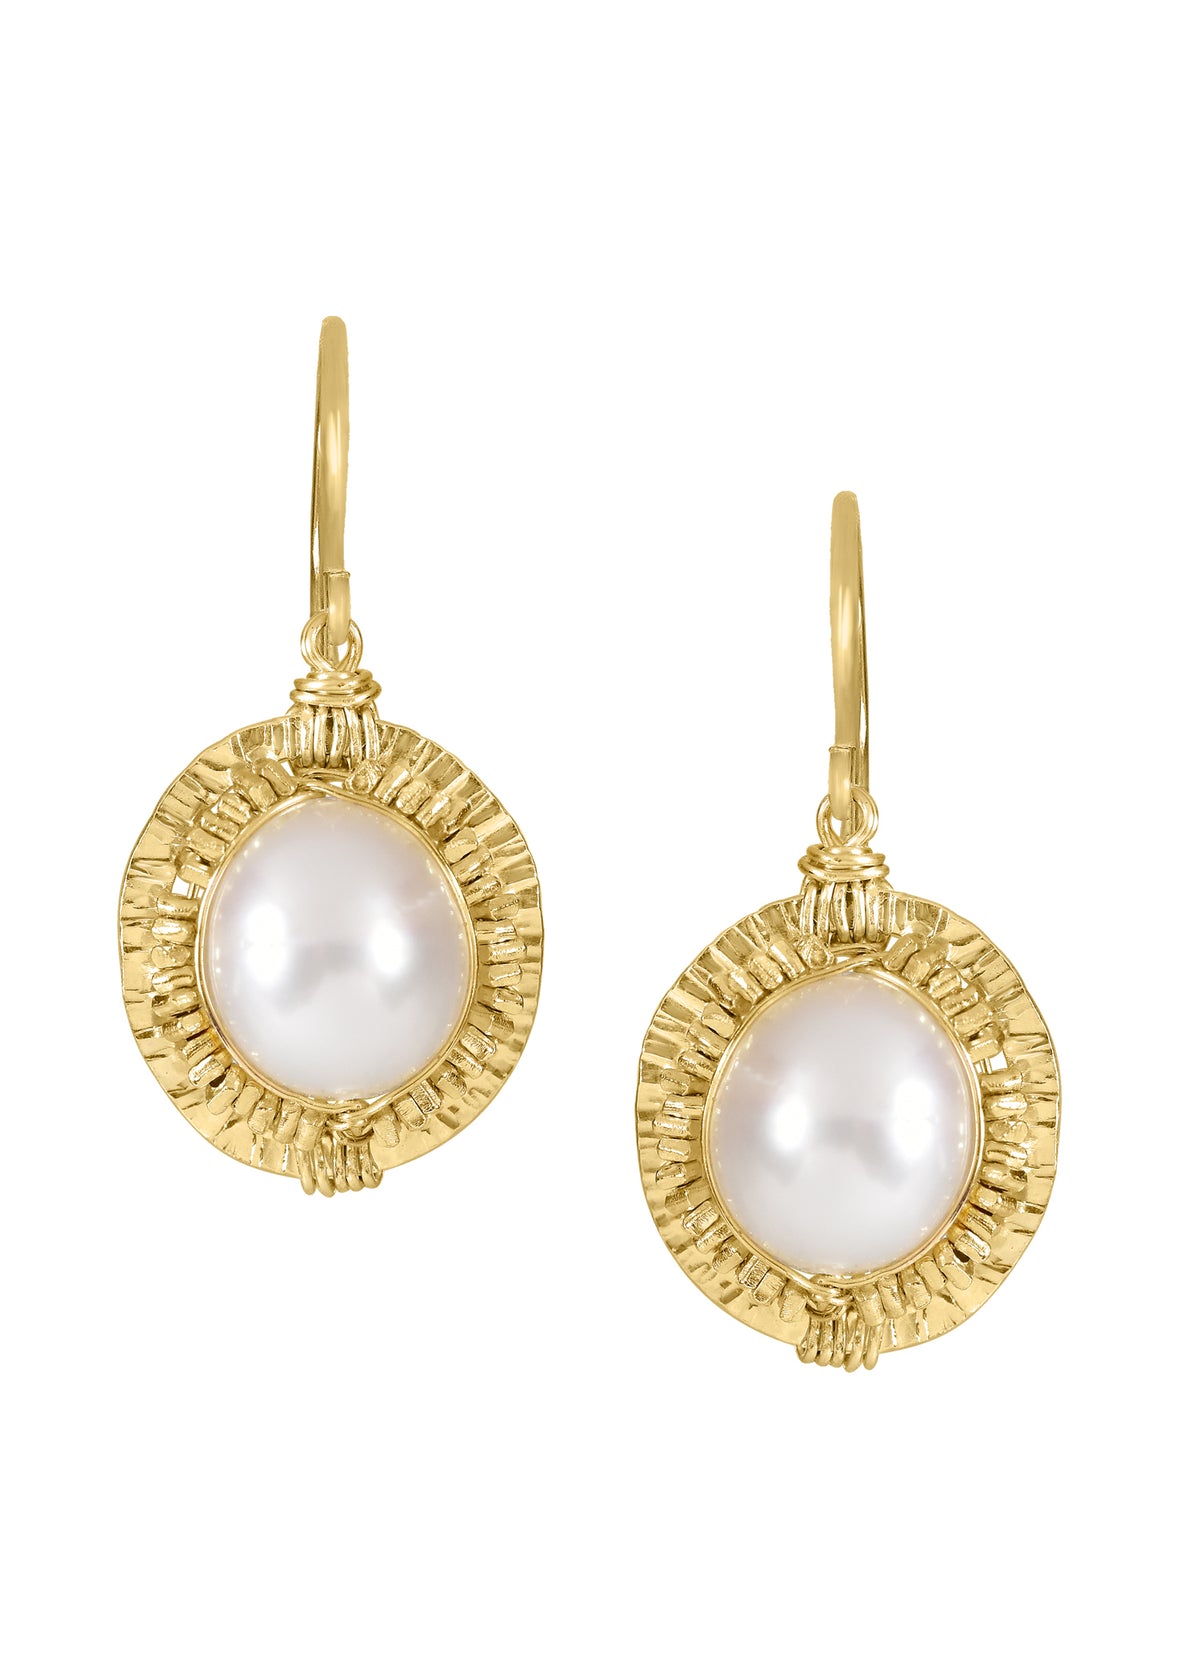 Freshwater pearl 14k gold fill 14k gold vermeil sterling silver beads Earrings measure at 1&quot; in length (including the ear wires) and 1/2&quot; in width Handmade in our Los Angeles studio